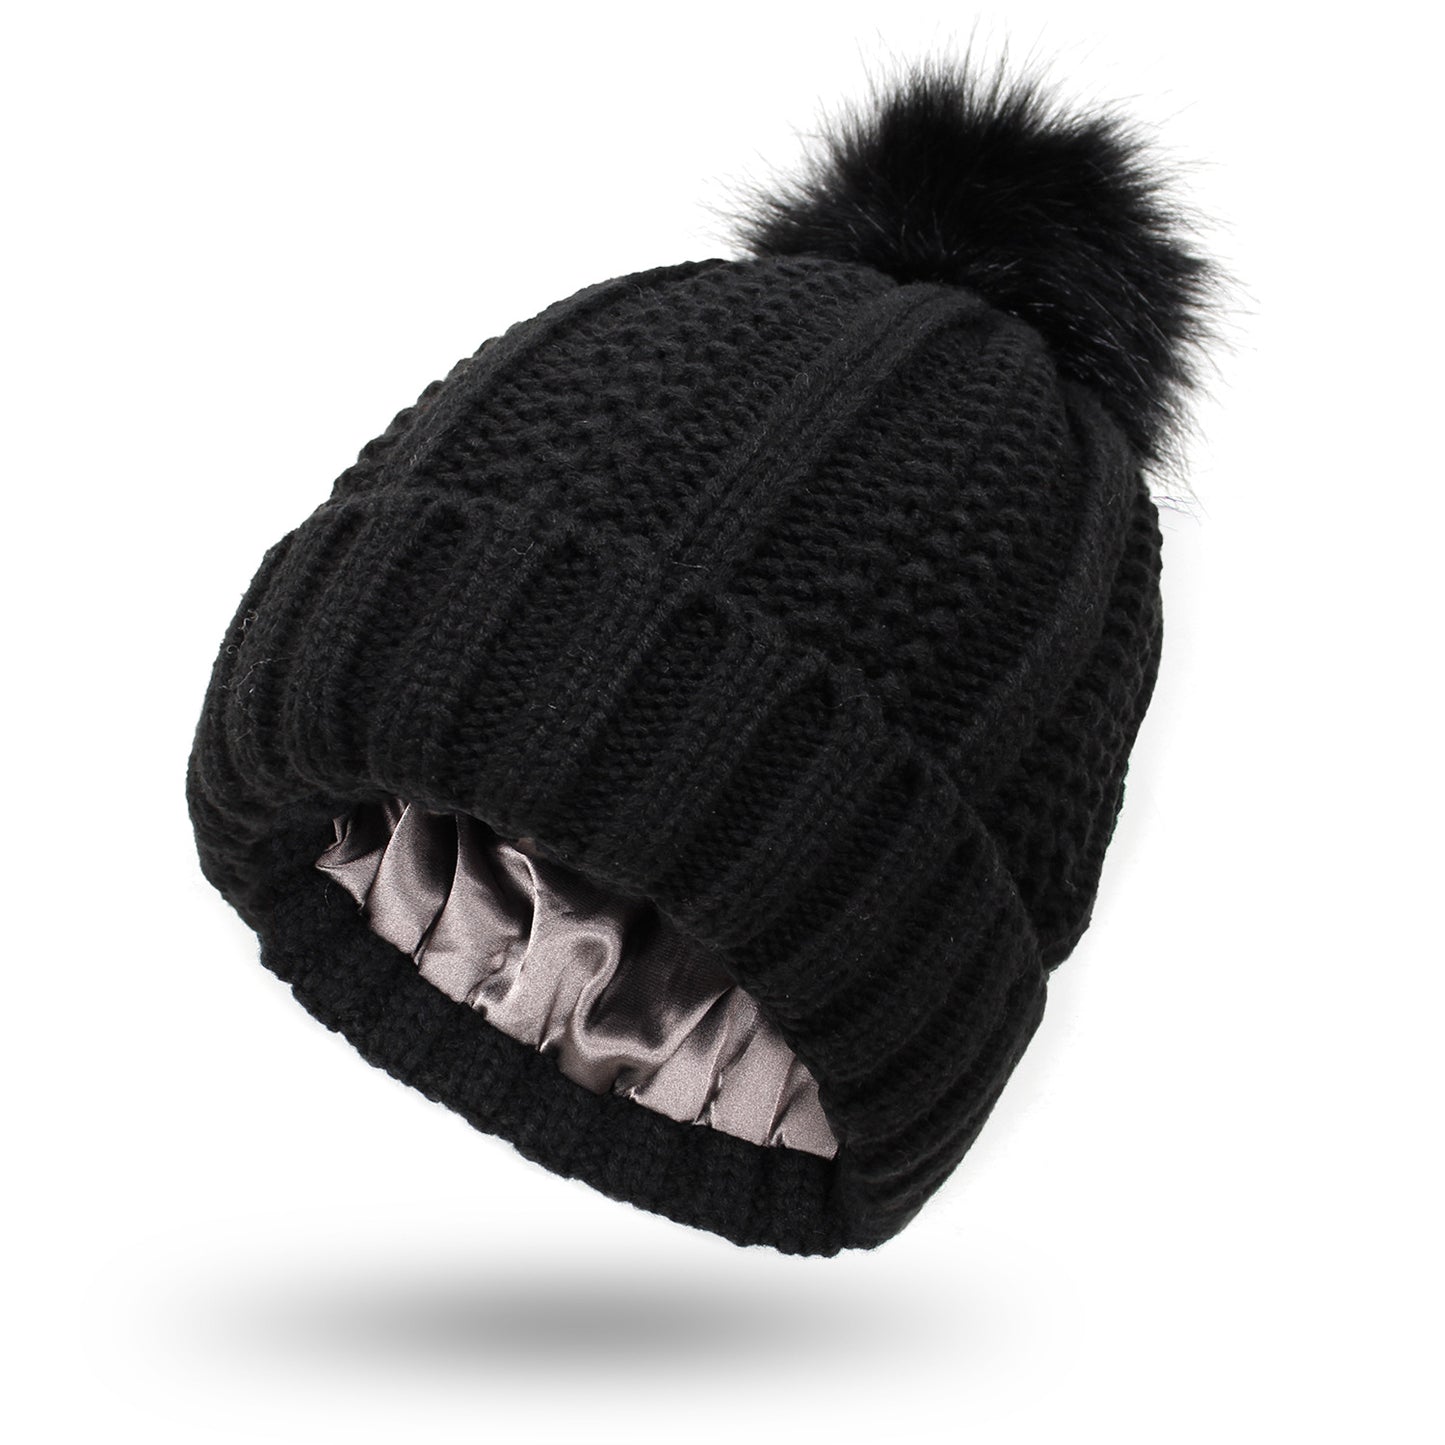 Fashion Stretchy Satin Lined Skull Knit Hats Beanie Hat